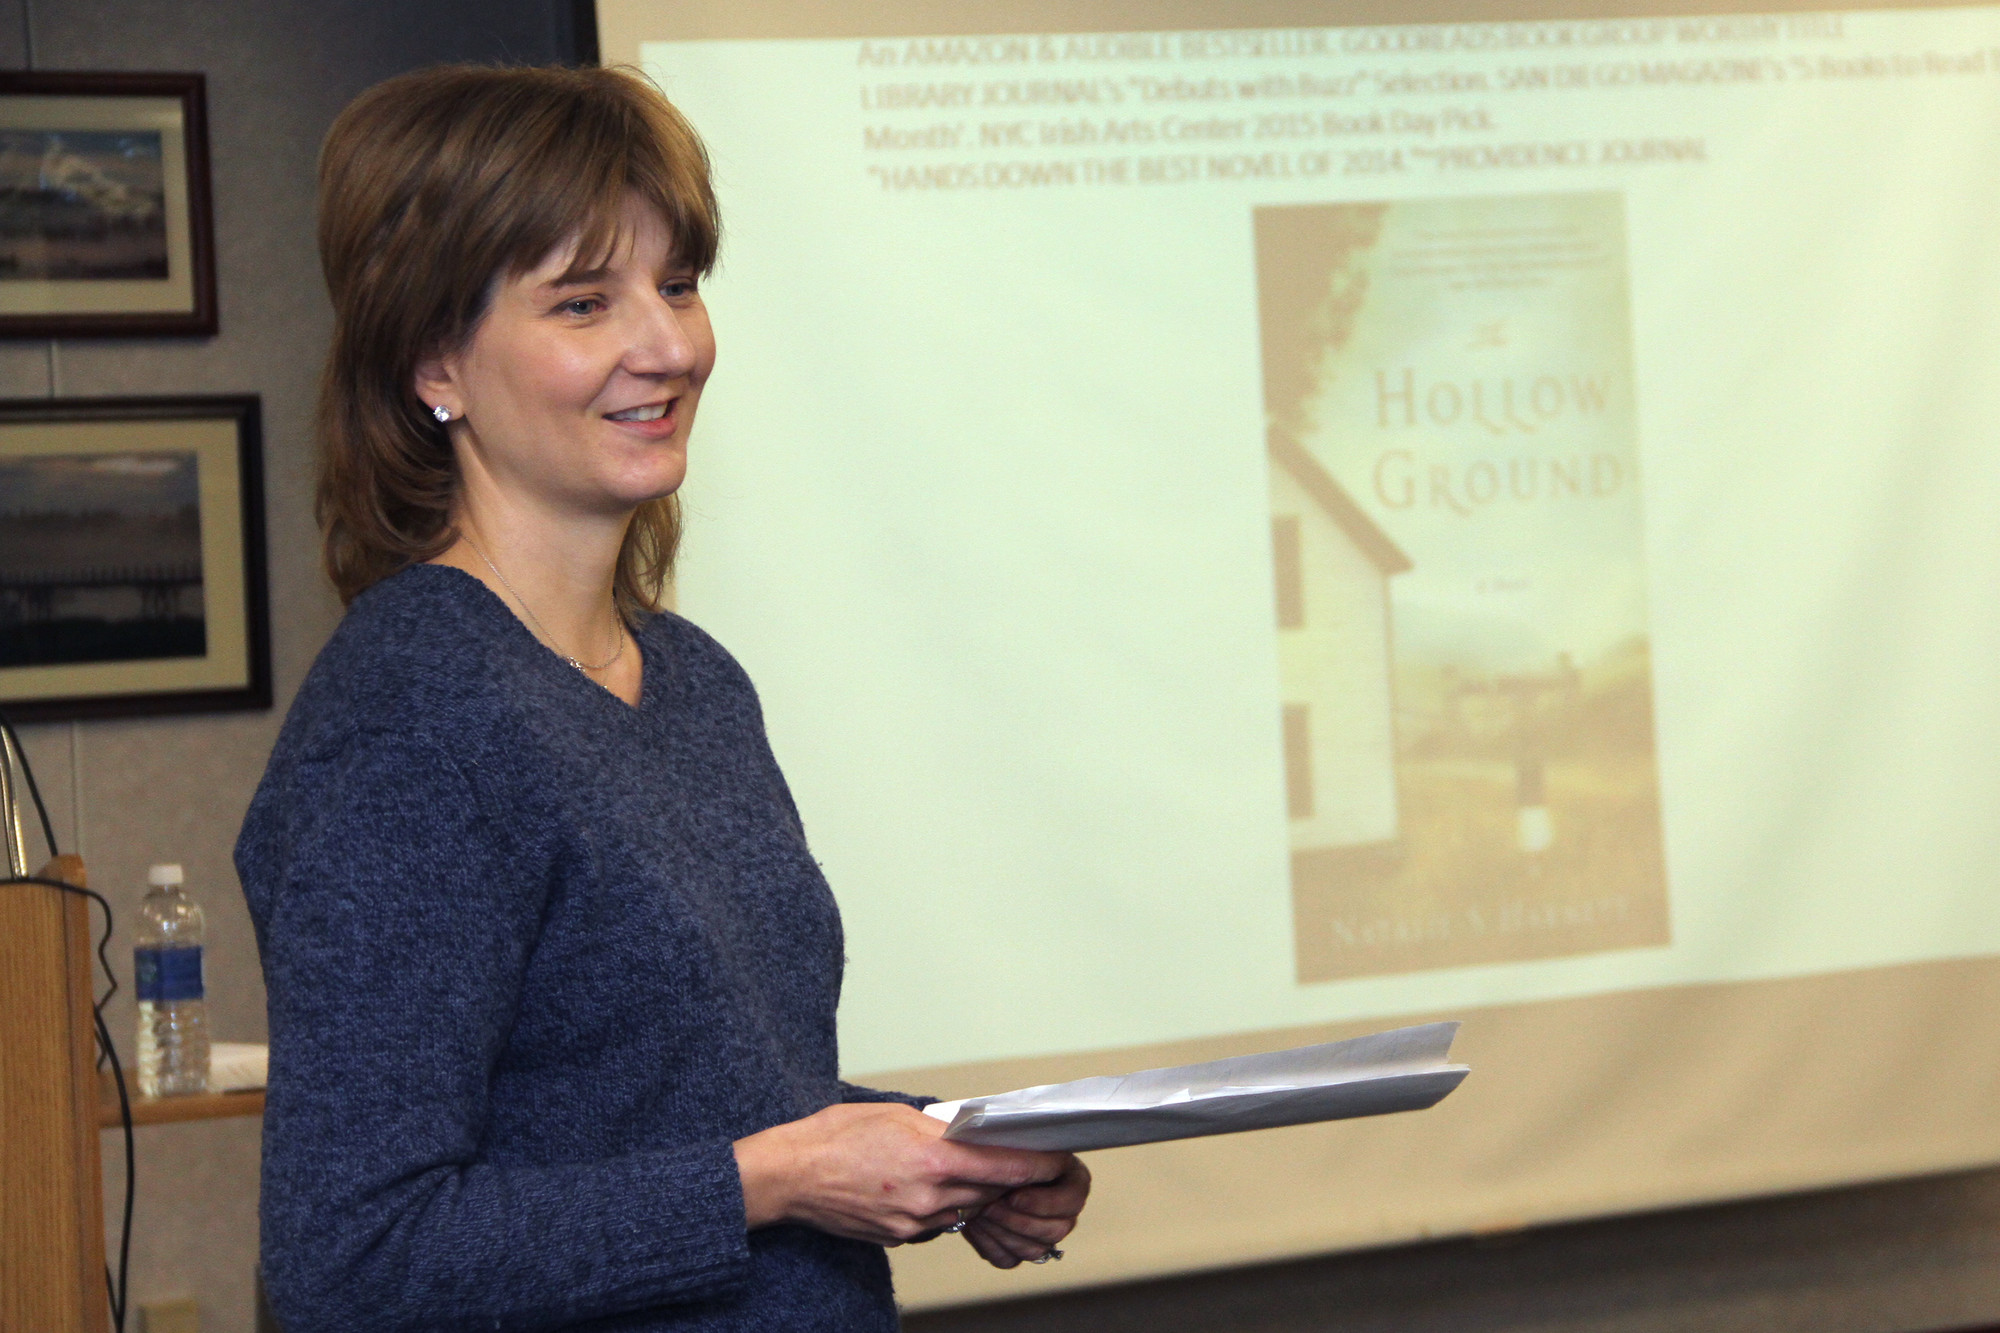 Author Natalie Harnett talks about her book, "The Hollow Ground."